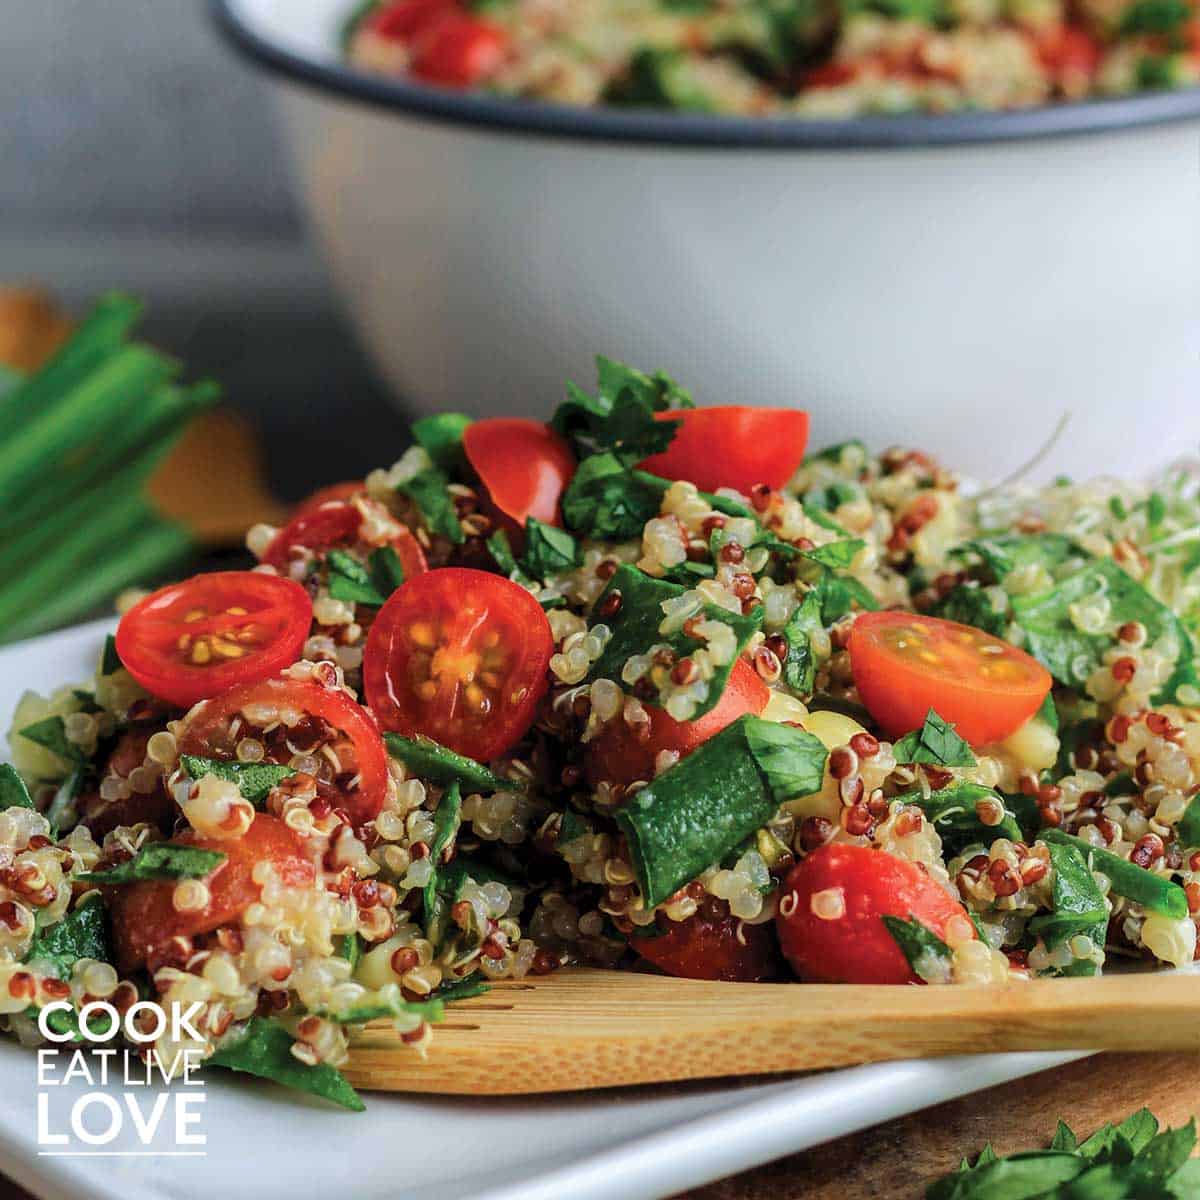 Zesty quinoa salad on a plate with a wooden fork